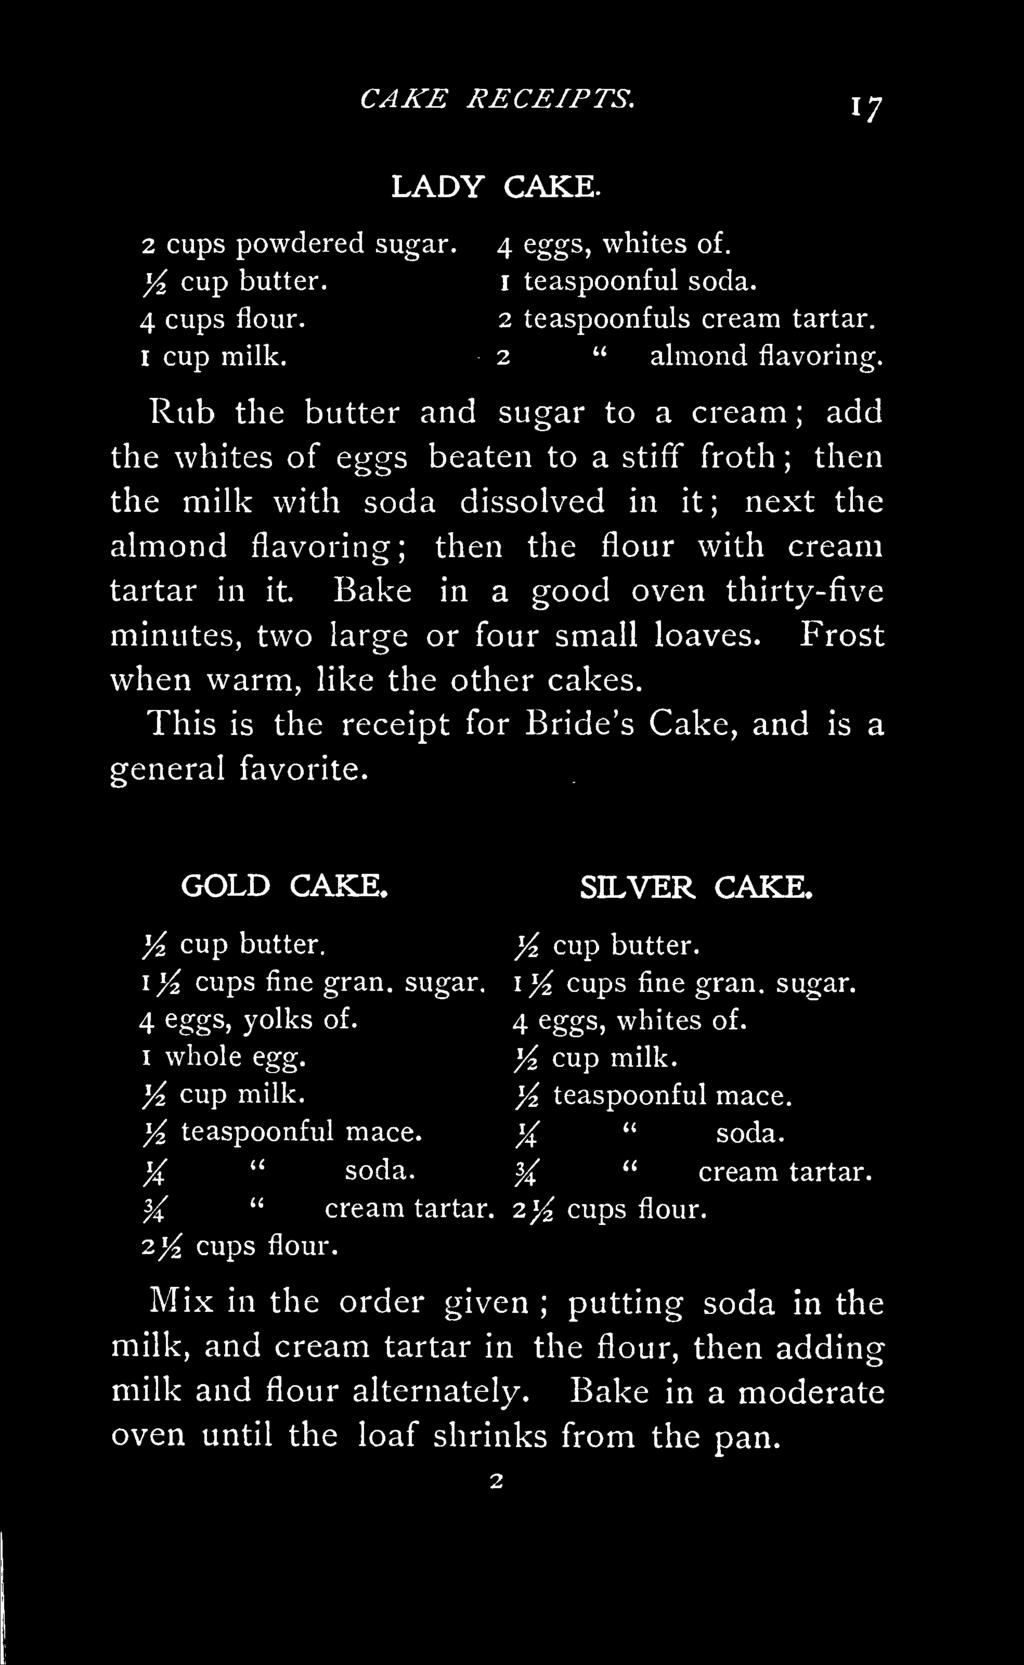 Bake in a good oven thirty-five minutes, two large or four small loaves. Frost when warm, like the other cakes. This is the receipt for Bride's Cake, and is a general favorite. GOLD CAKE. SILVER CAKE.